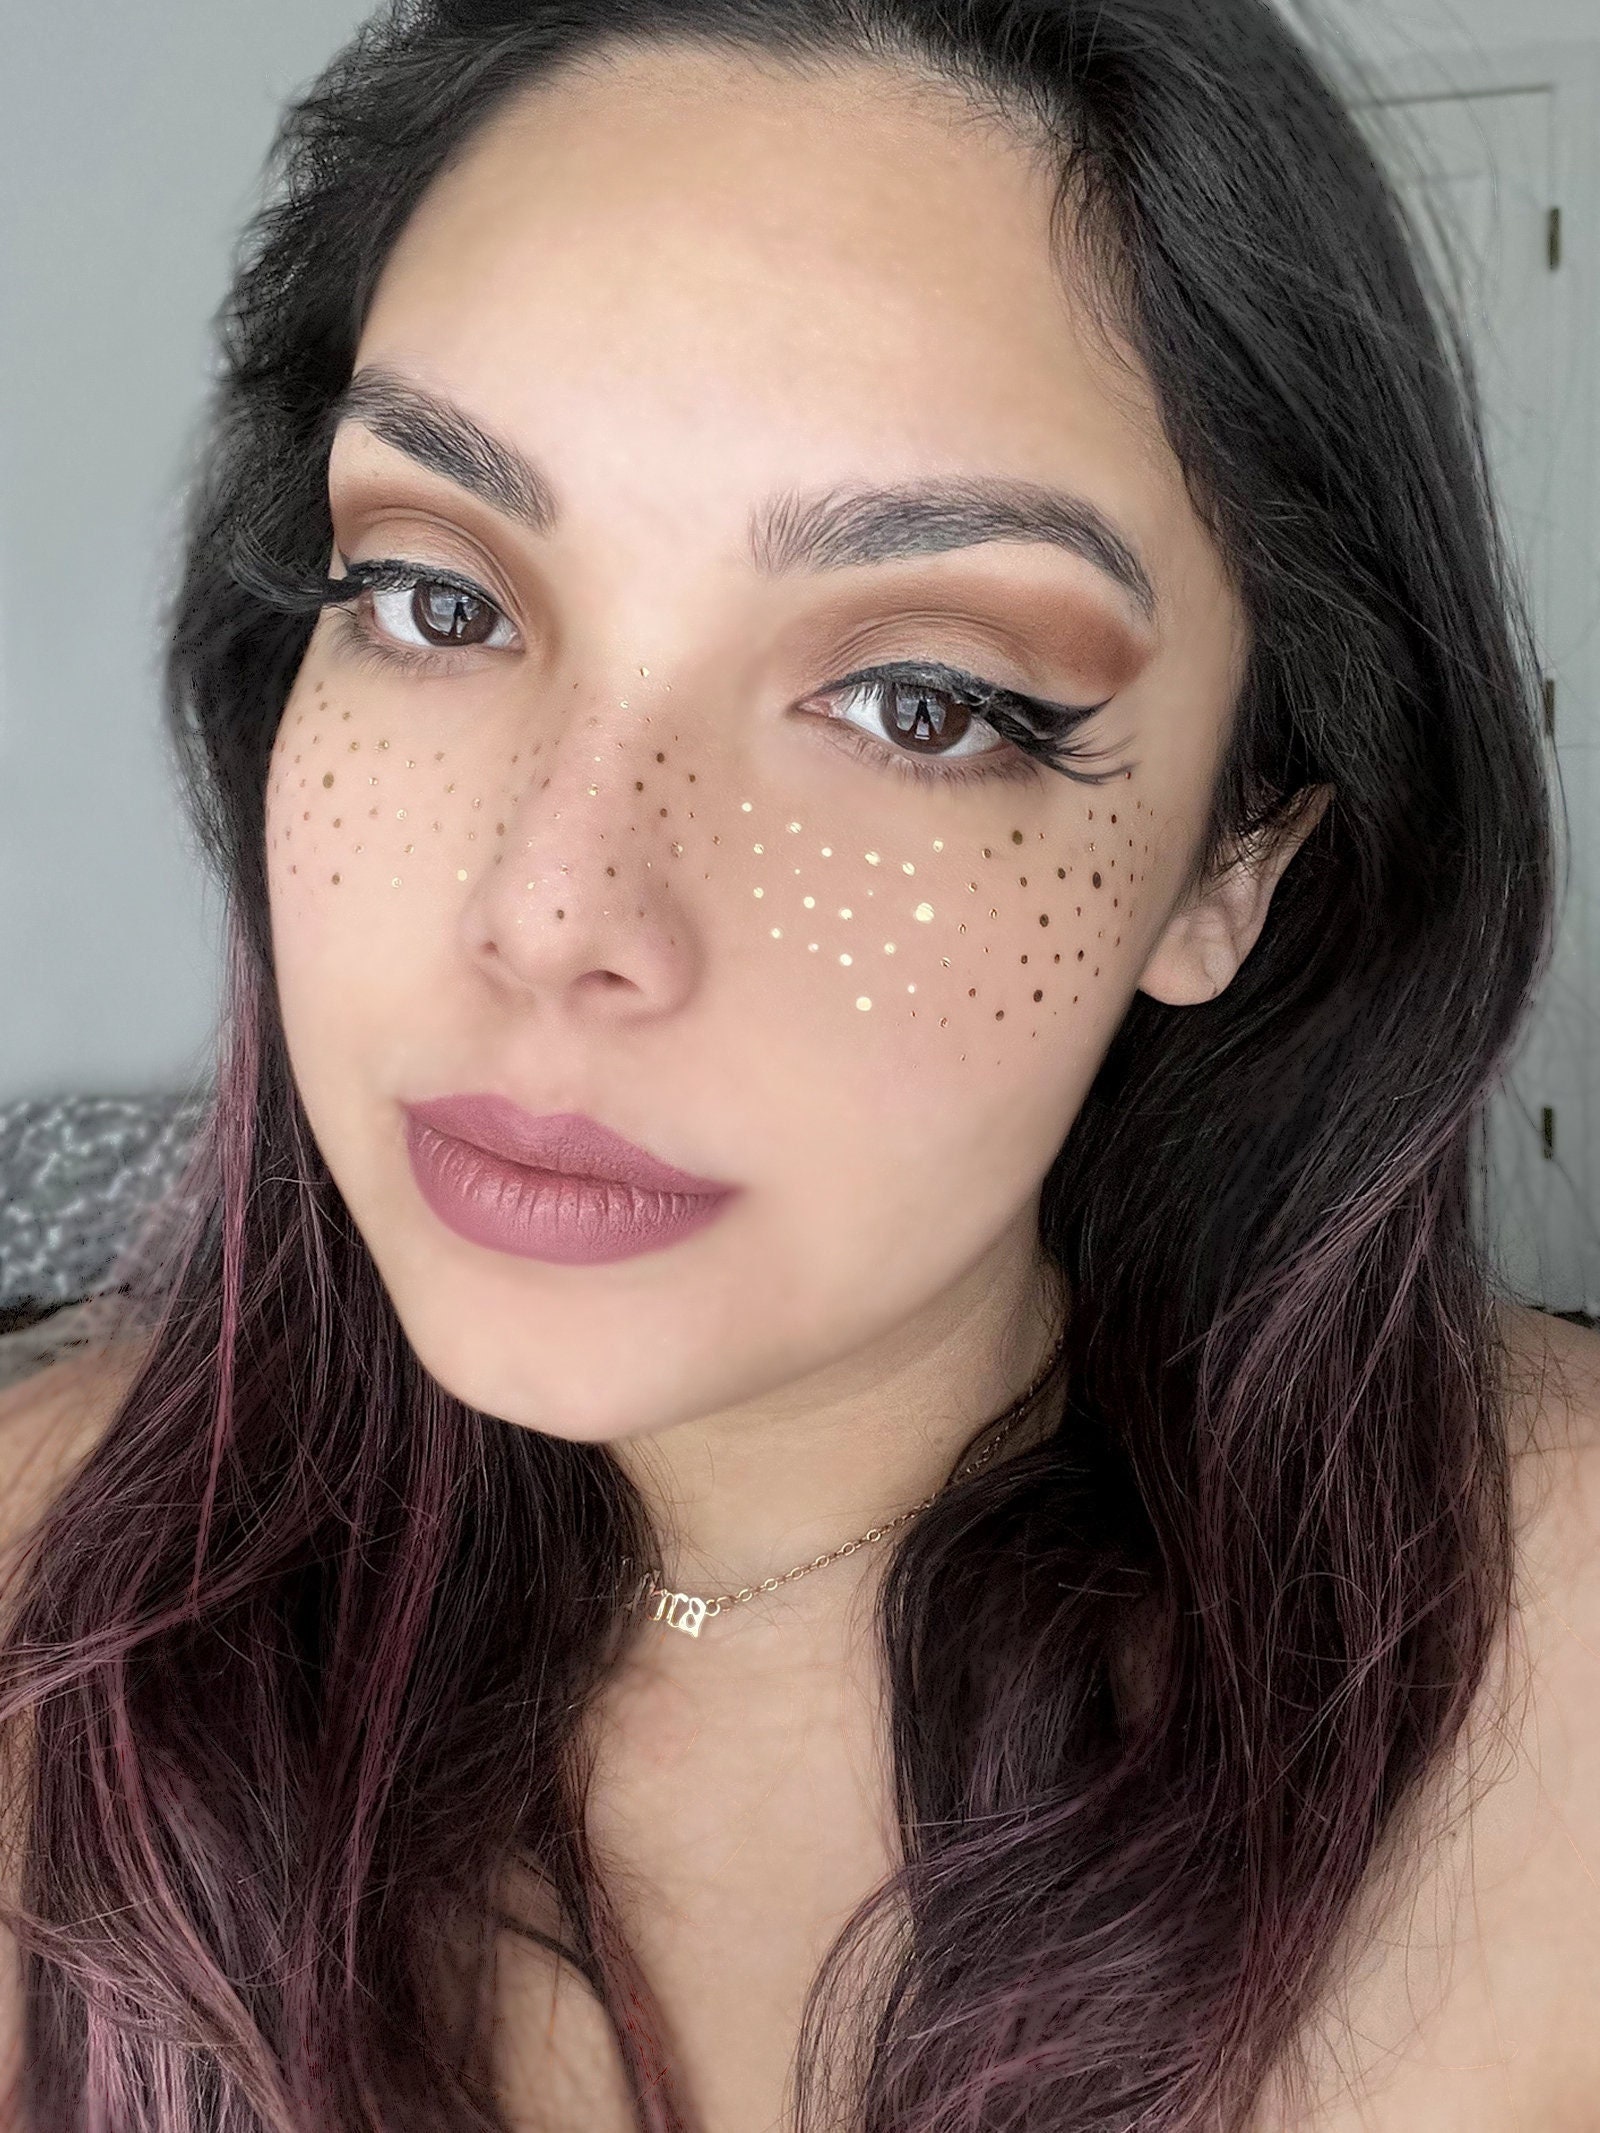 Gold Freckles Face Tattoo Sticker Temporary/ Henna Freckles/ pic